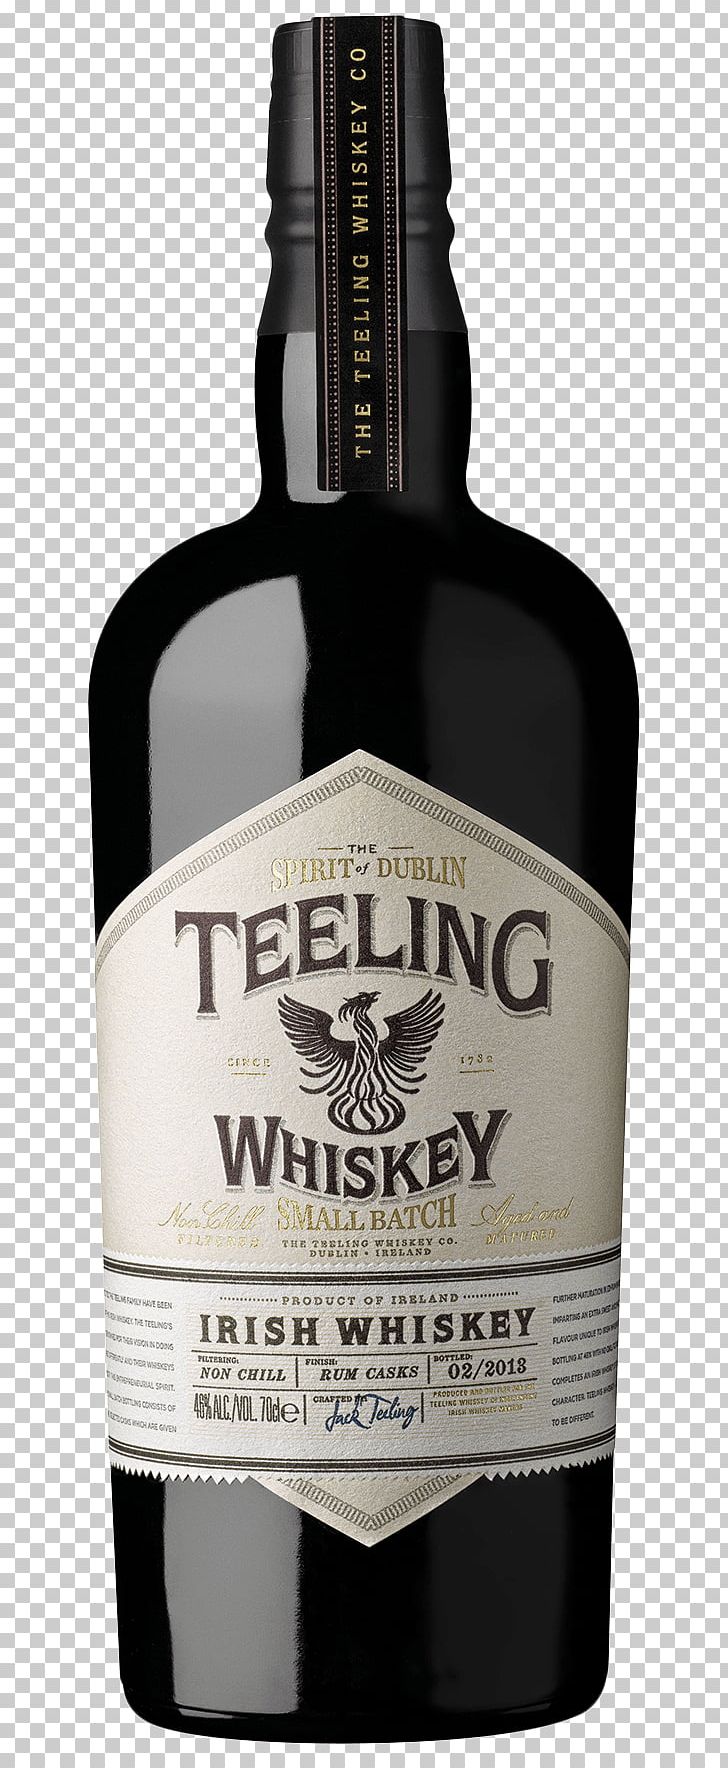 Teeling Distillery Irish Whiskey Single Malt Whisky Bourbon Whiskey PNG, Clipart, Alcoholic Beverage, Barrel, Batch, Blended Whiskey, Bourbon Whiskey Free PNG Download